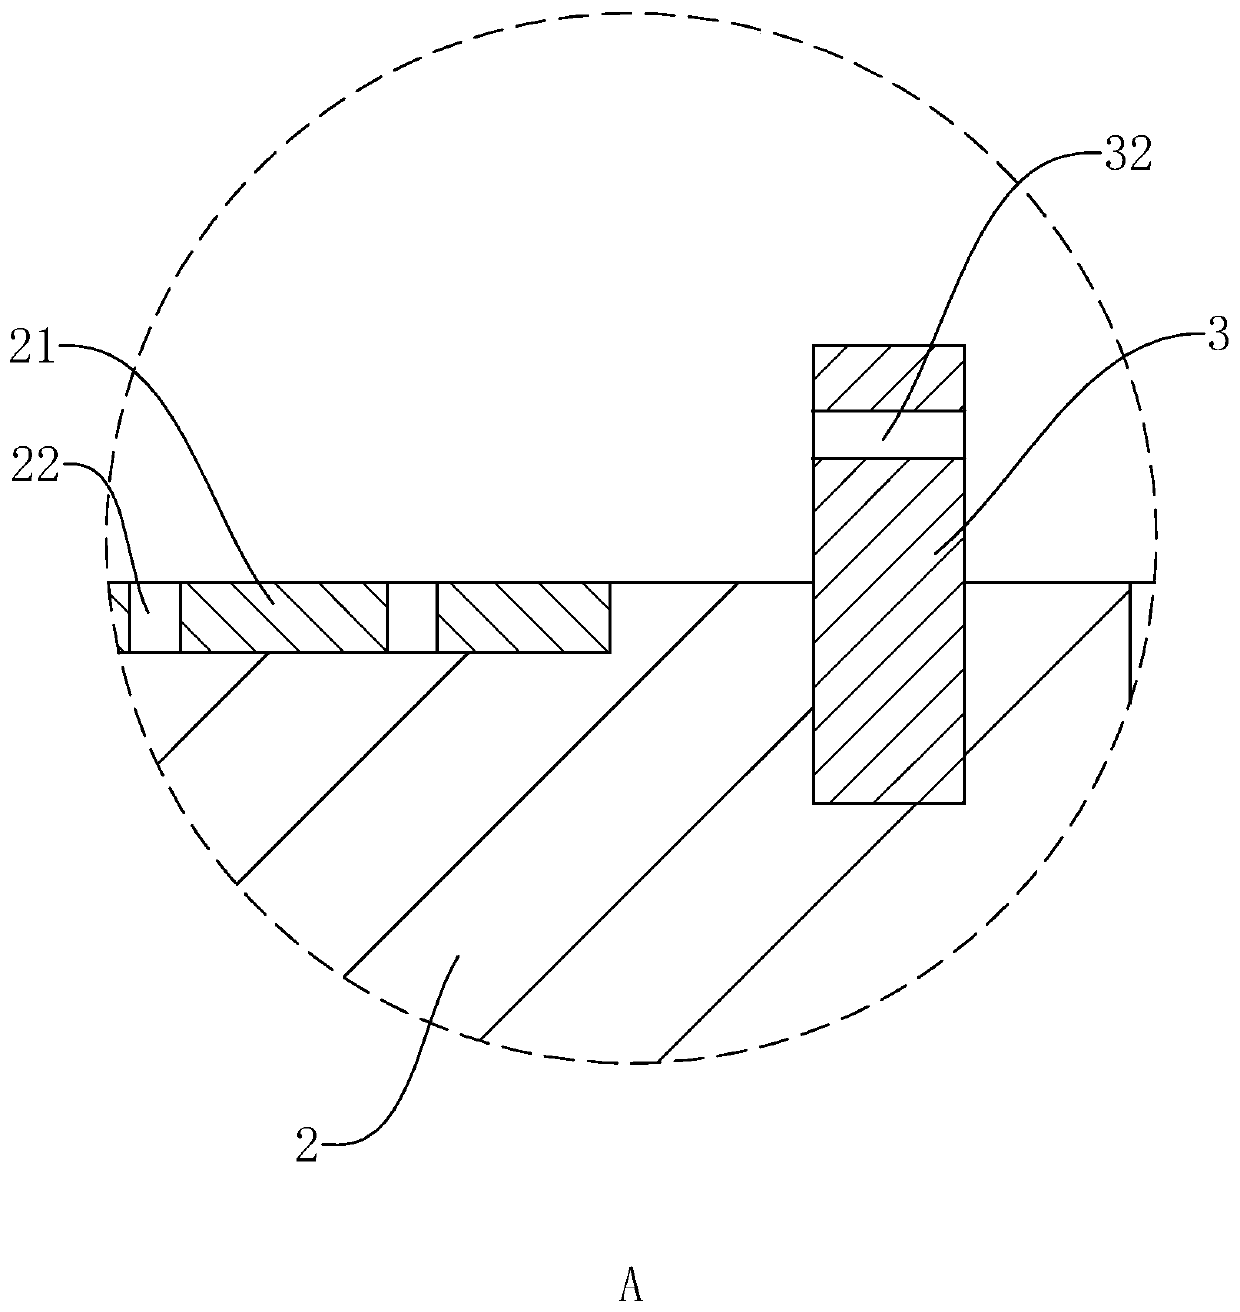 Energy dissipation structure for water conveying hole